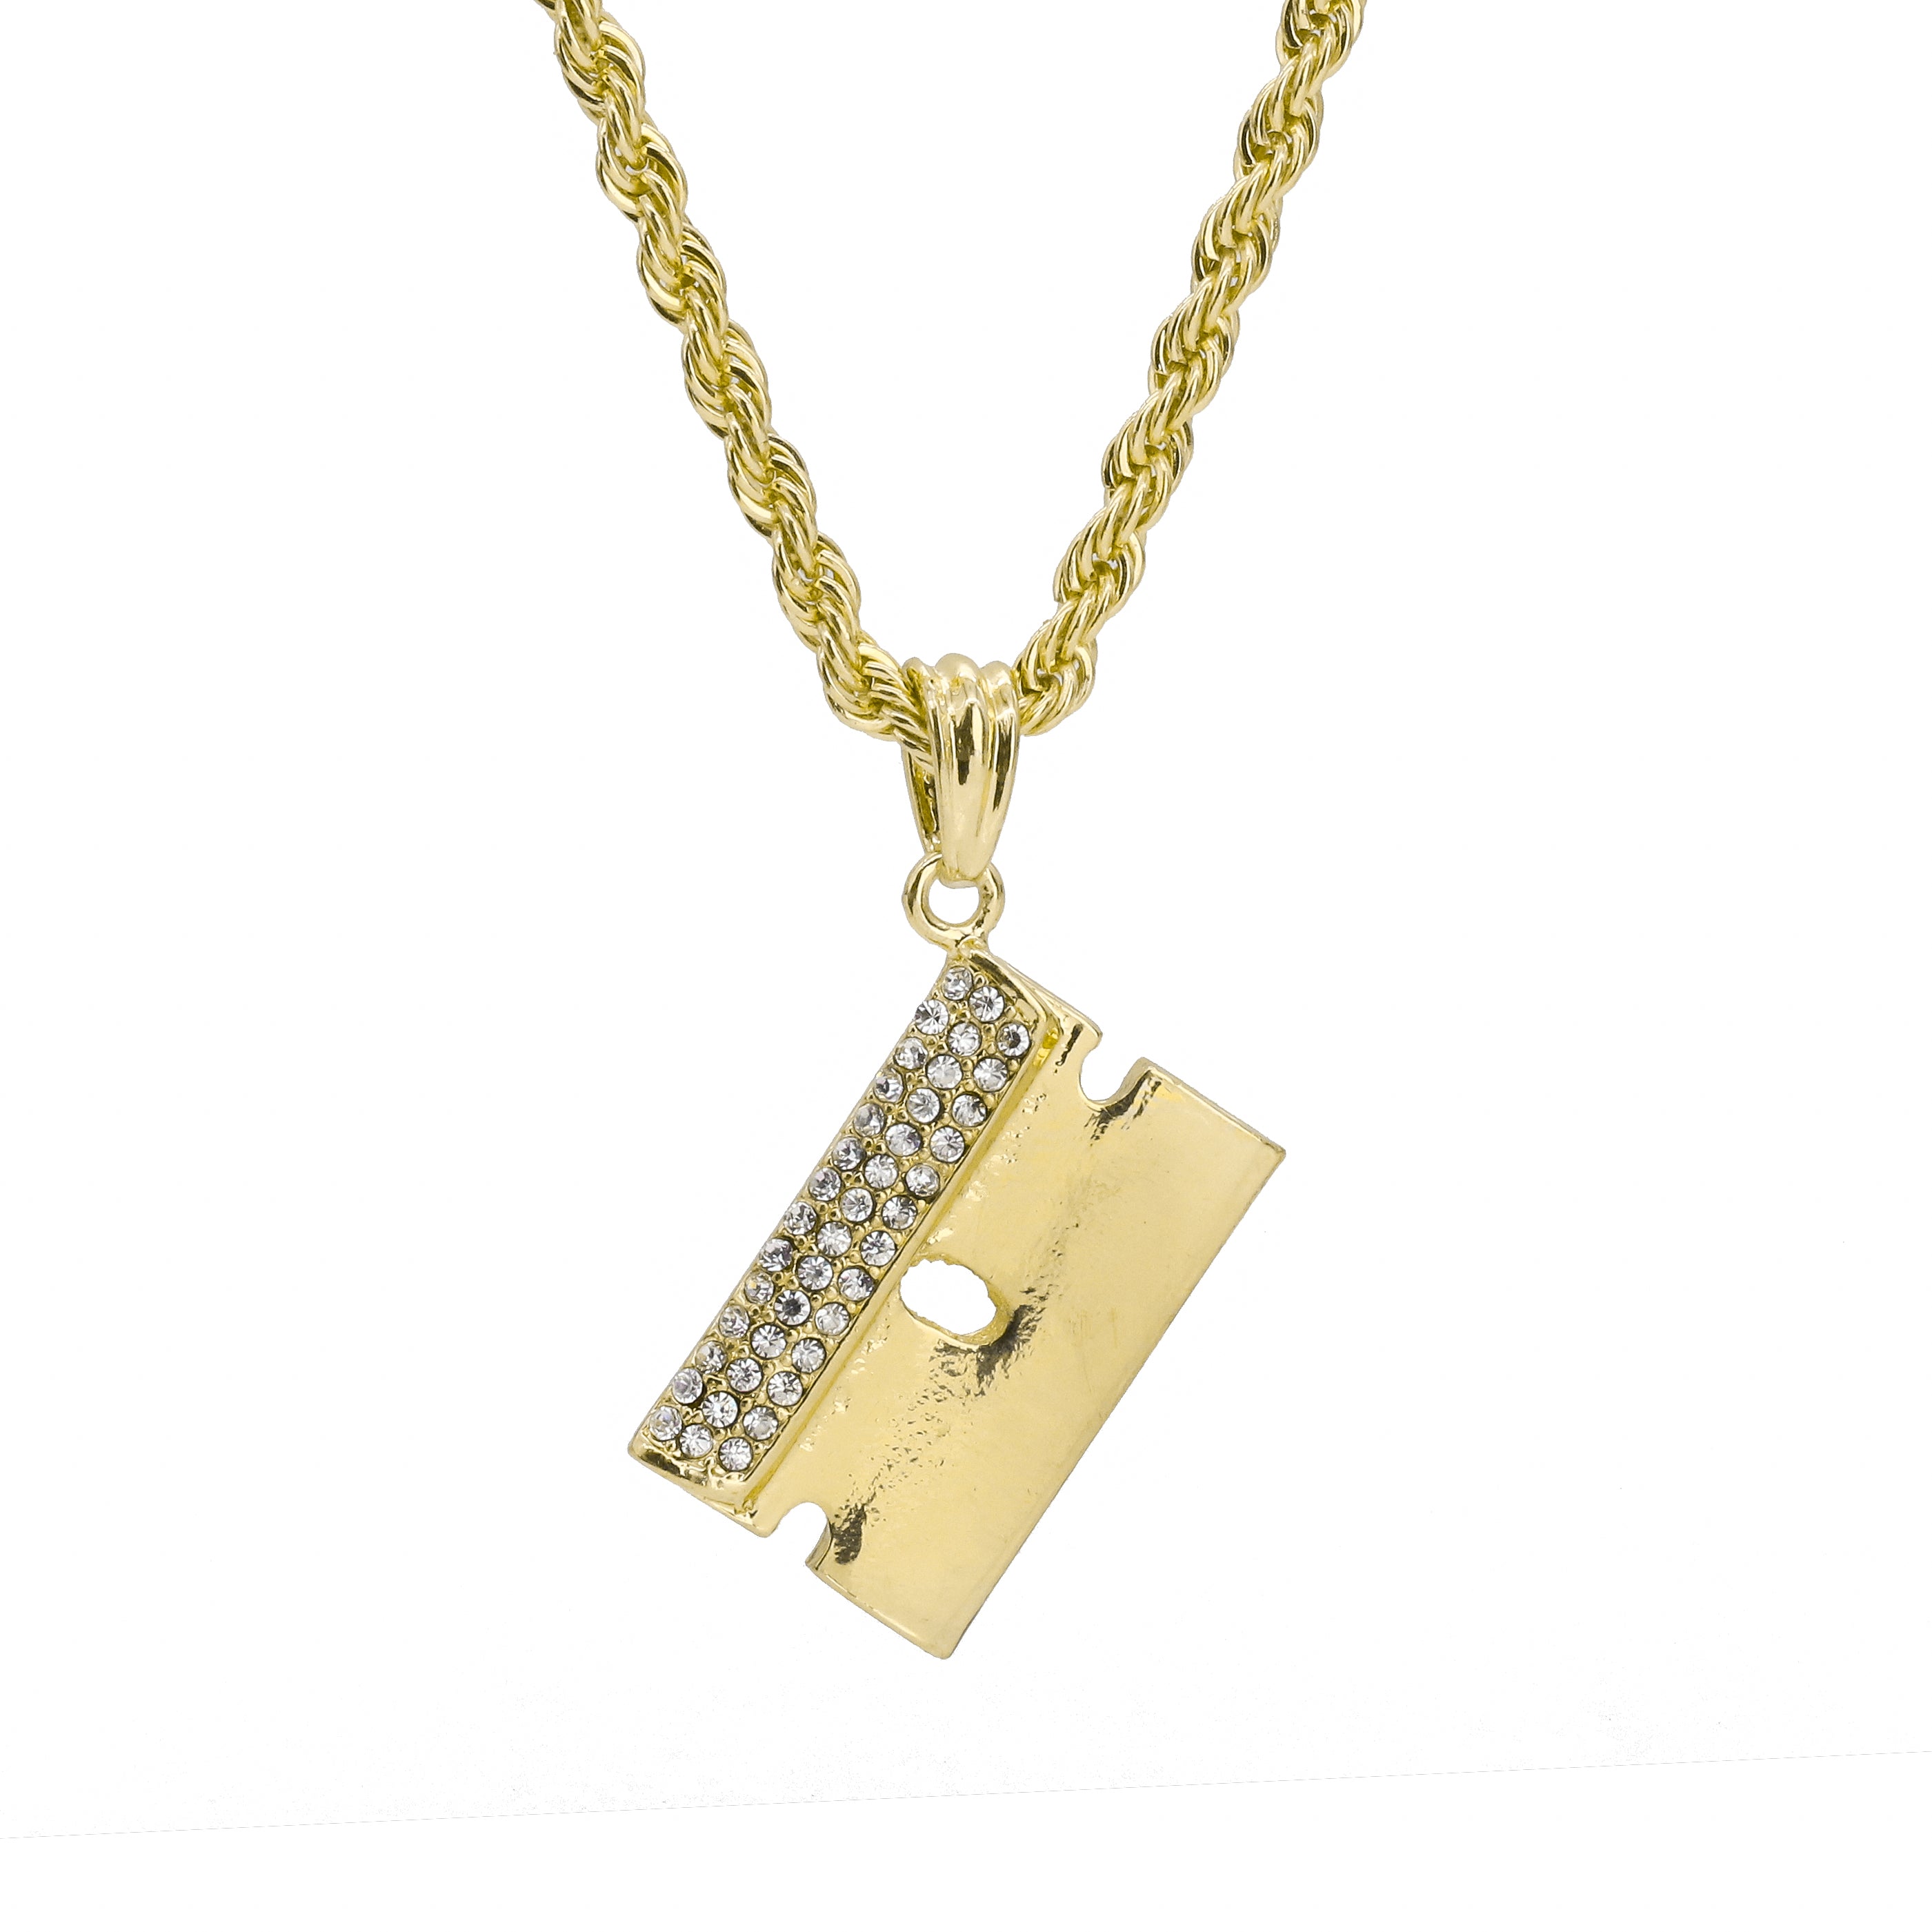 Cz Razor Pendant 24" Rope Chain Hip Hop Style 18k Gold Plated